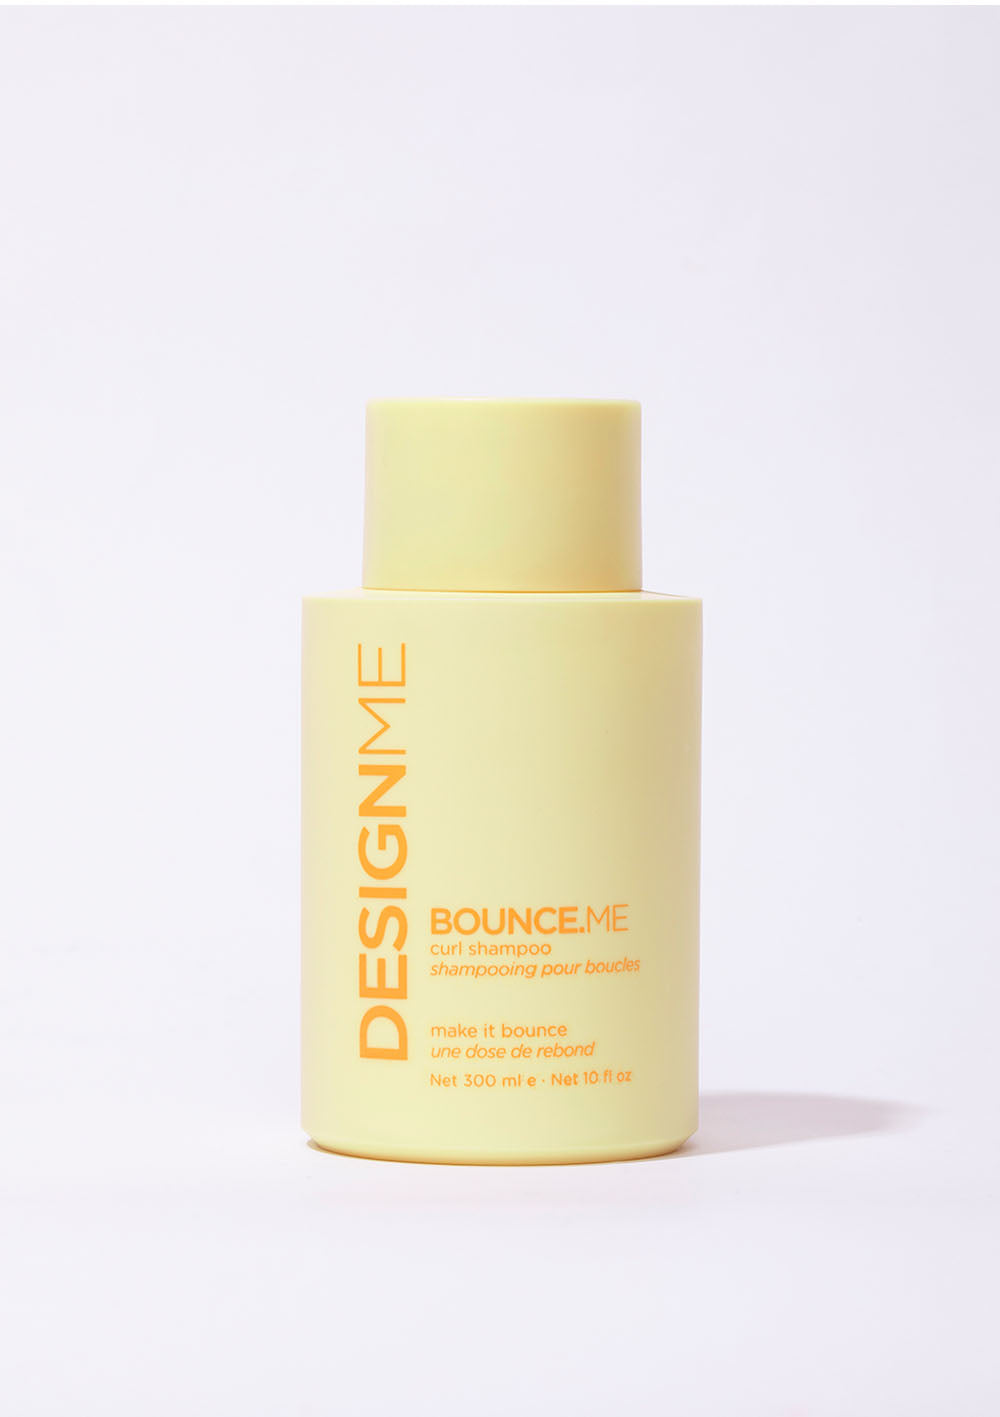 Designme - BOUNCE.ME • Shampooing boucles